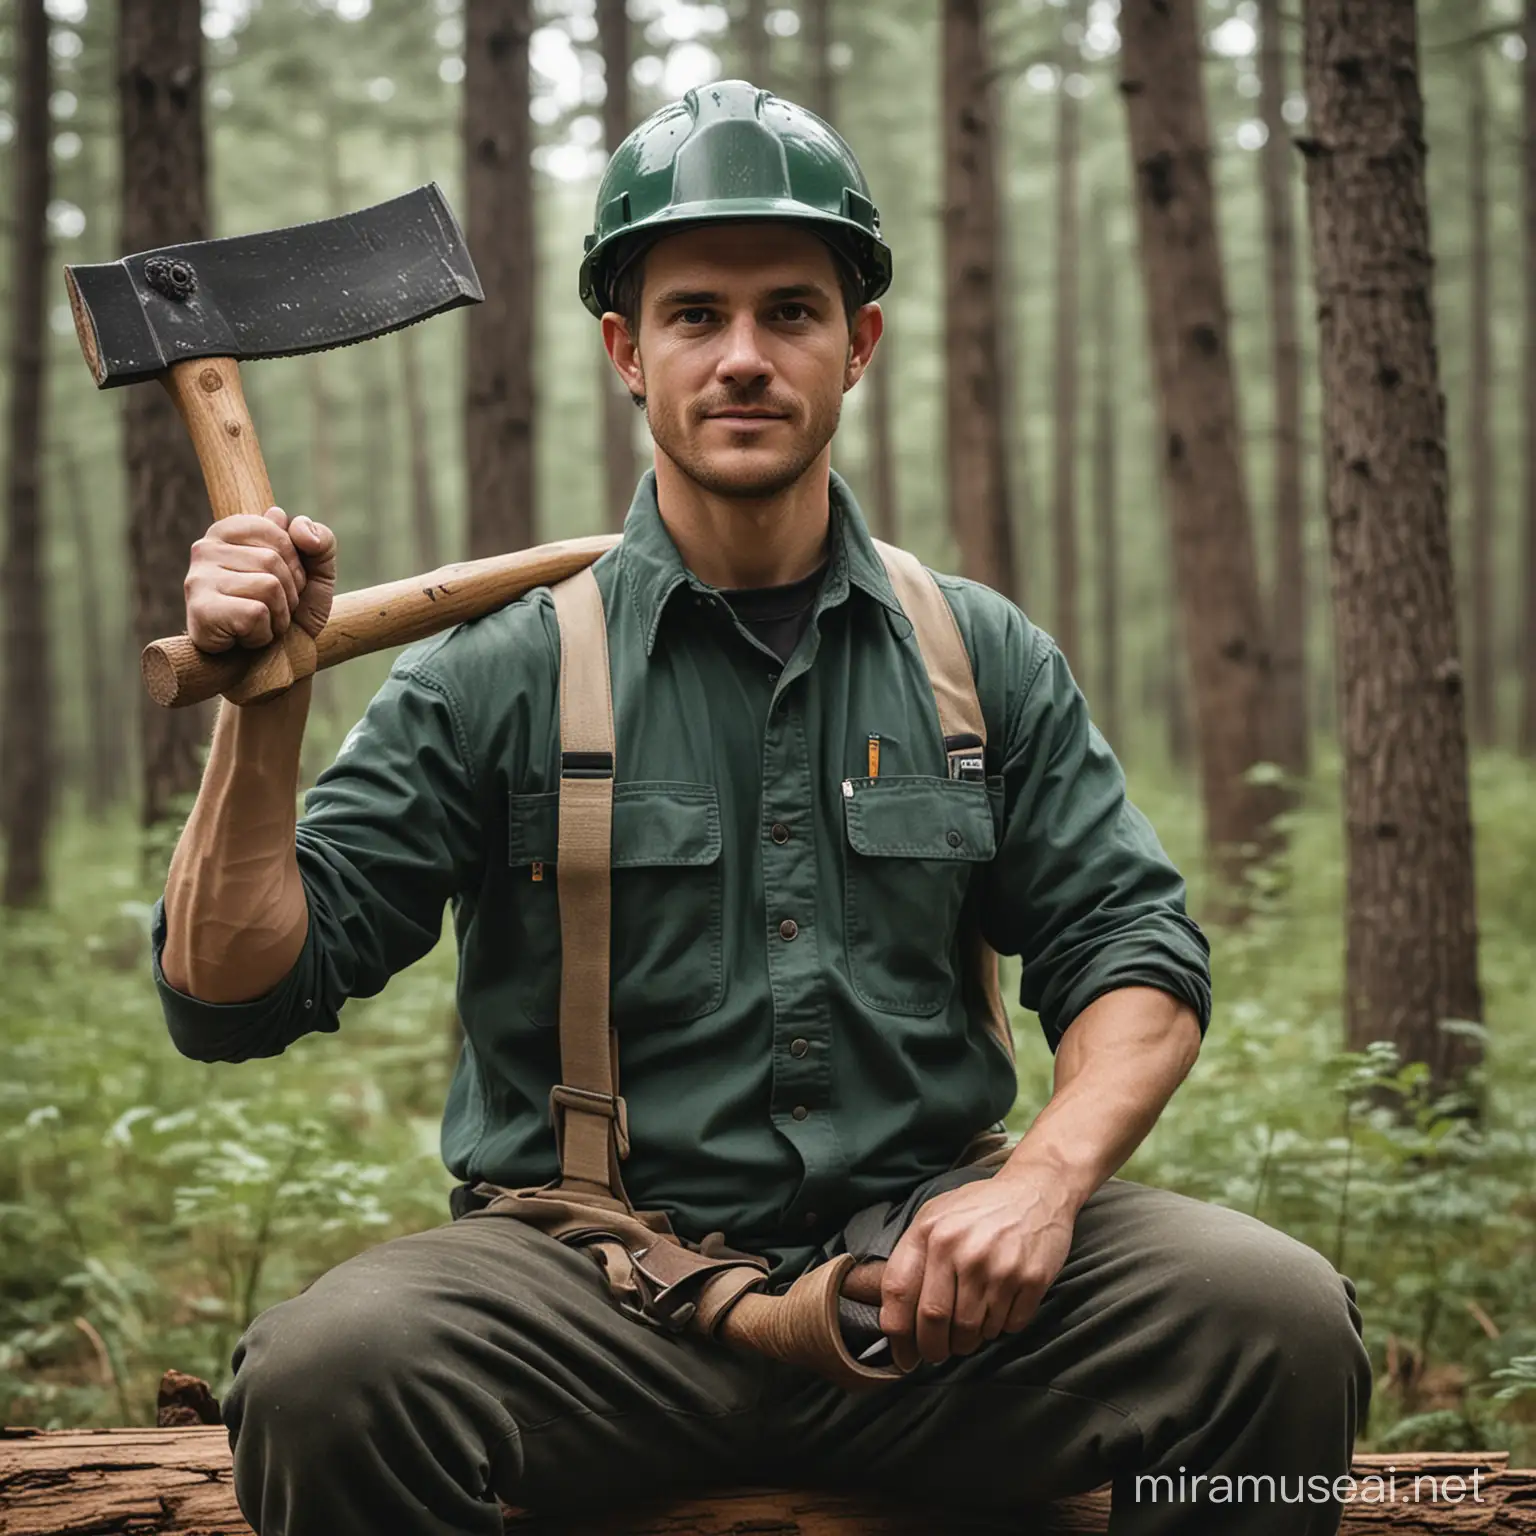 Generate the photo of a forest worker with two hands above shoulder level holding an axe, and seated with a straight back.
